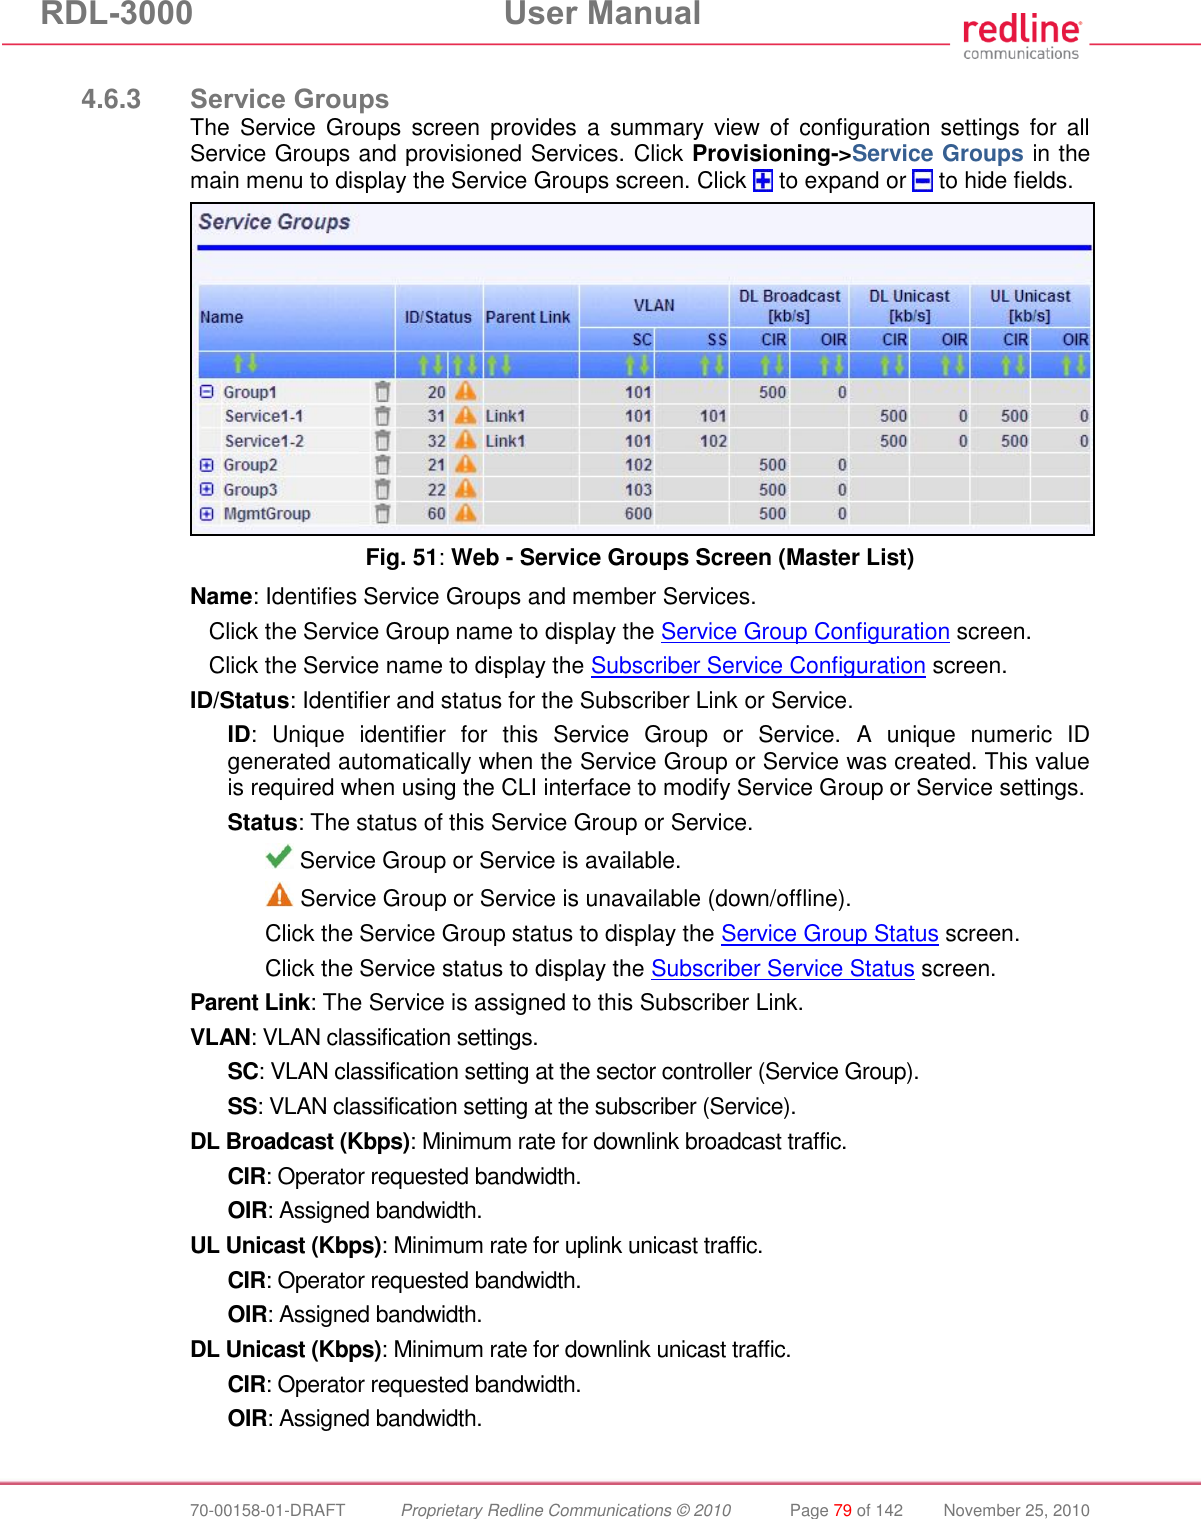 RDL-3000  User Manual  70-00158-01-DRAFT  Proprietary Redline Communications © 2010  Page 79 of 142  November 25, 2010  4.6.3 Service Groups The  Service  Groups  screen  provides  a  summary  view  of  configuration settings  for  all Service Groups and provisioned Services. Click Provisioning-&gt;Service Groups in the main menu to display the Service Groups screen. Click   to expand or   to hide fields.  Fig. 51: Web - Service Groups Screen (Master List) Name: Identifies Service Groups and member Services. Click the Service Group name to display the Service Group Configuration screen. Click the Service name to display the Subscriber Service Configuration screen. ID/Status: Identifier and status for the Subscriber Link or Service. ID:  Unique  identifier  for  this  Service  Group  or  Service.  A  unique  numeric  ID generated automatically when the Service Group or Service was created. This value is required when using the CLI interface to modify Service Group or Service settings. Status: The status of this Service Group or Service.  Service Group or Service is available.  Service Group or Service is unavailable (down/offline). Click the Service Group status to display the Service Group Status screen. Click the Service status to display the Subscriber Service Status screen. Parent Link: The Service is assigned to this Subscriber Link. VLAN: VLAN classification settings. SC: VLAN classification setting at the sector controller (Service Group). SS: VLAN classification setting at the subscriber (Service). DL Broadcast (Kbps): Minimum rate for downlink broadcast traffic.  CIR: Operator requested bandwidth. OIR: Assigned bandwidth. UL Unicast (Kbps): Minimum rate for uplink unicast traffic. CIR: Operator requested bandwidth. OIR: Assigned bandwidth. DL Unicast (Kbps): Minimum rate for downlink unicast traffic. CIR: Operator requested bandwidth. OIR: Assigned bandwidth. 